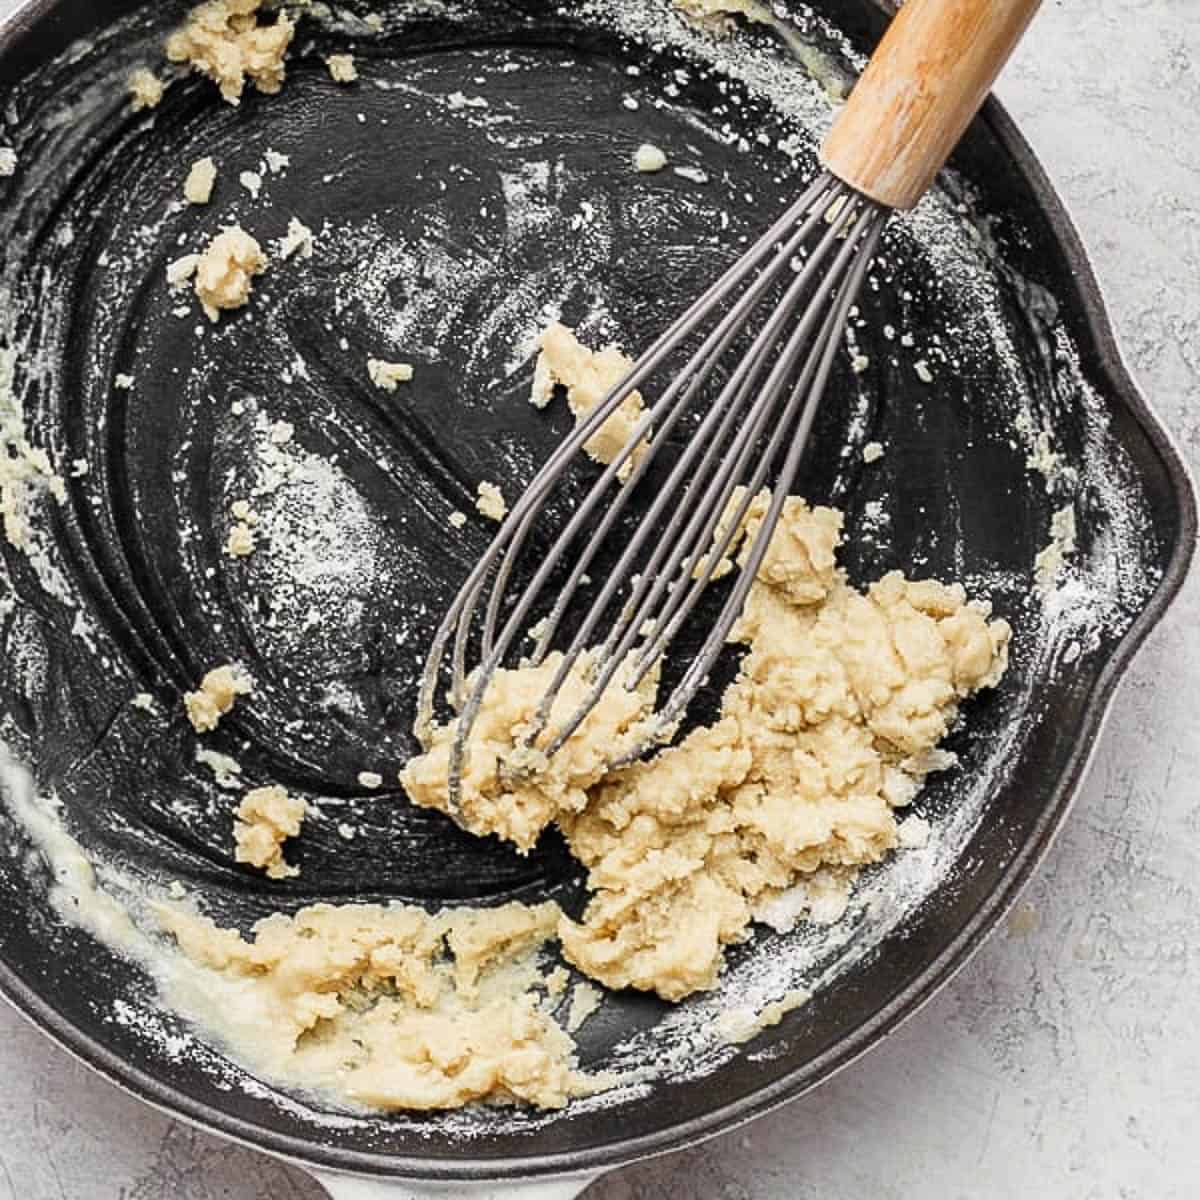 How to make a Roux - The Wooden Skillet